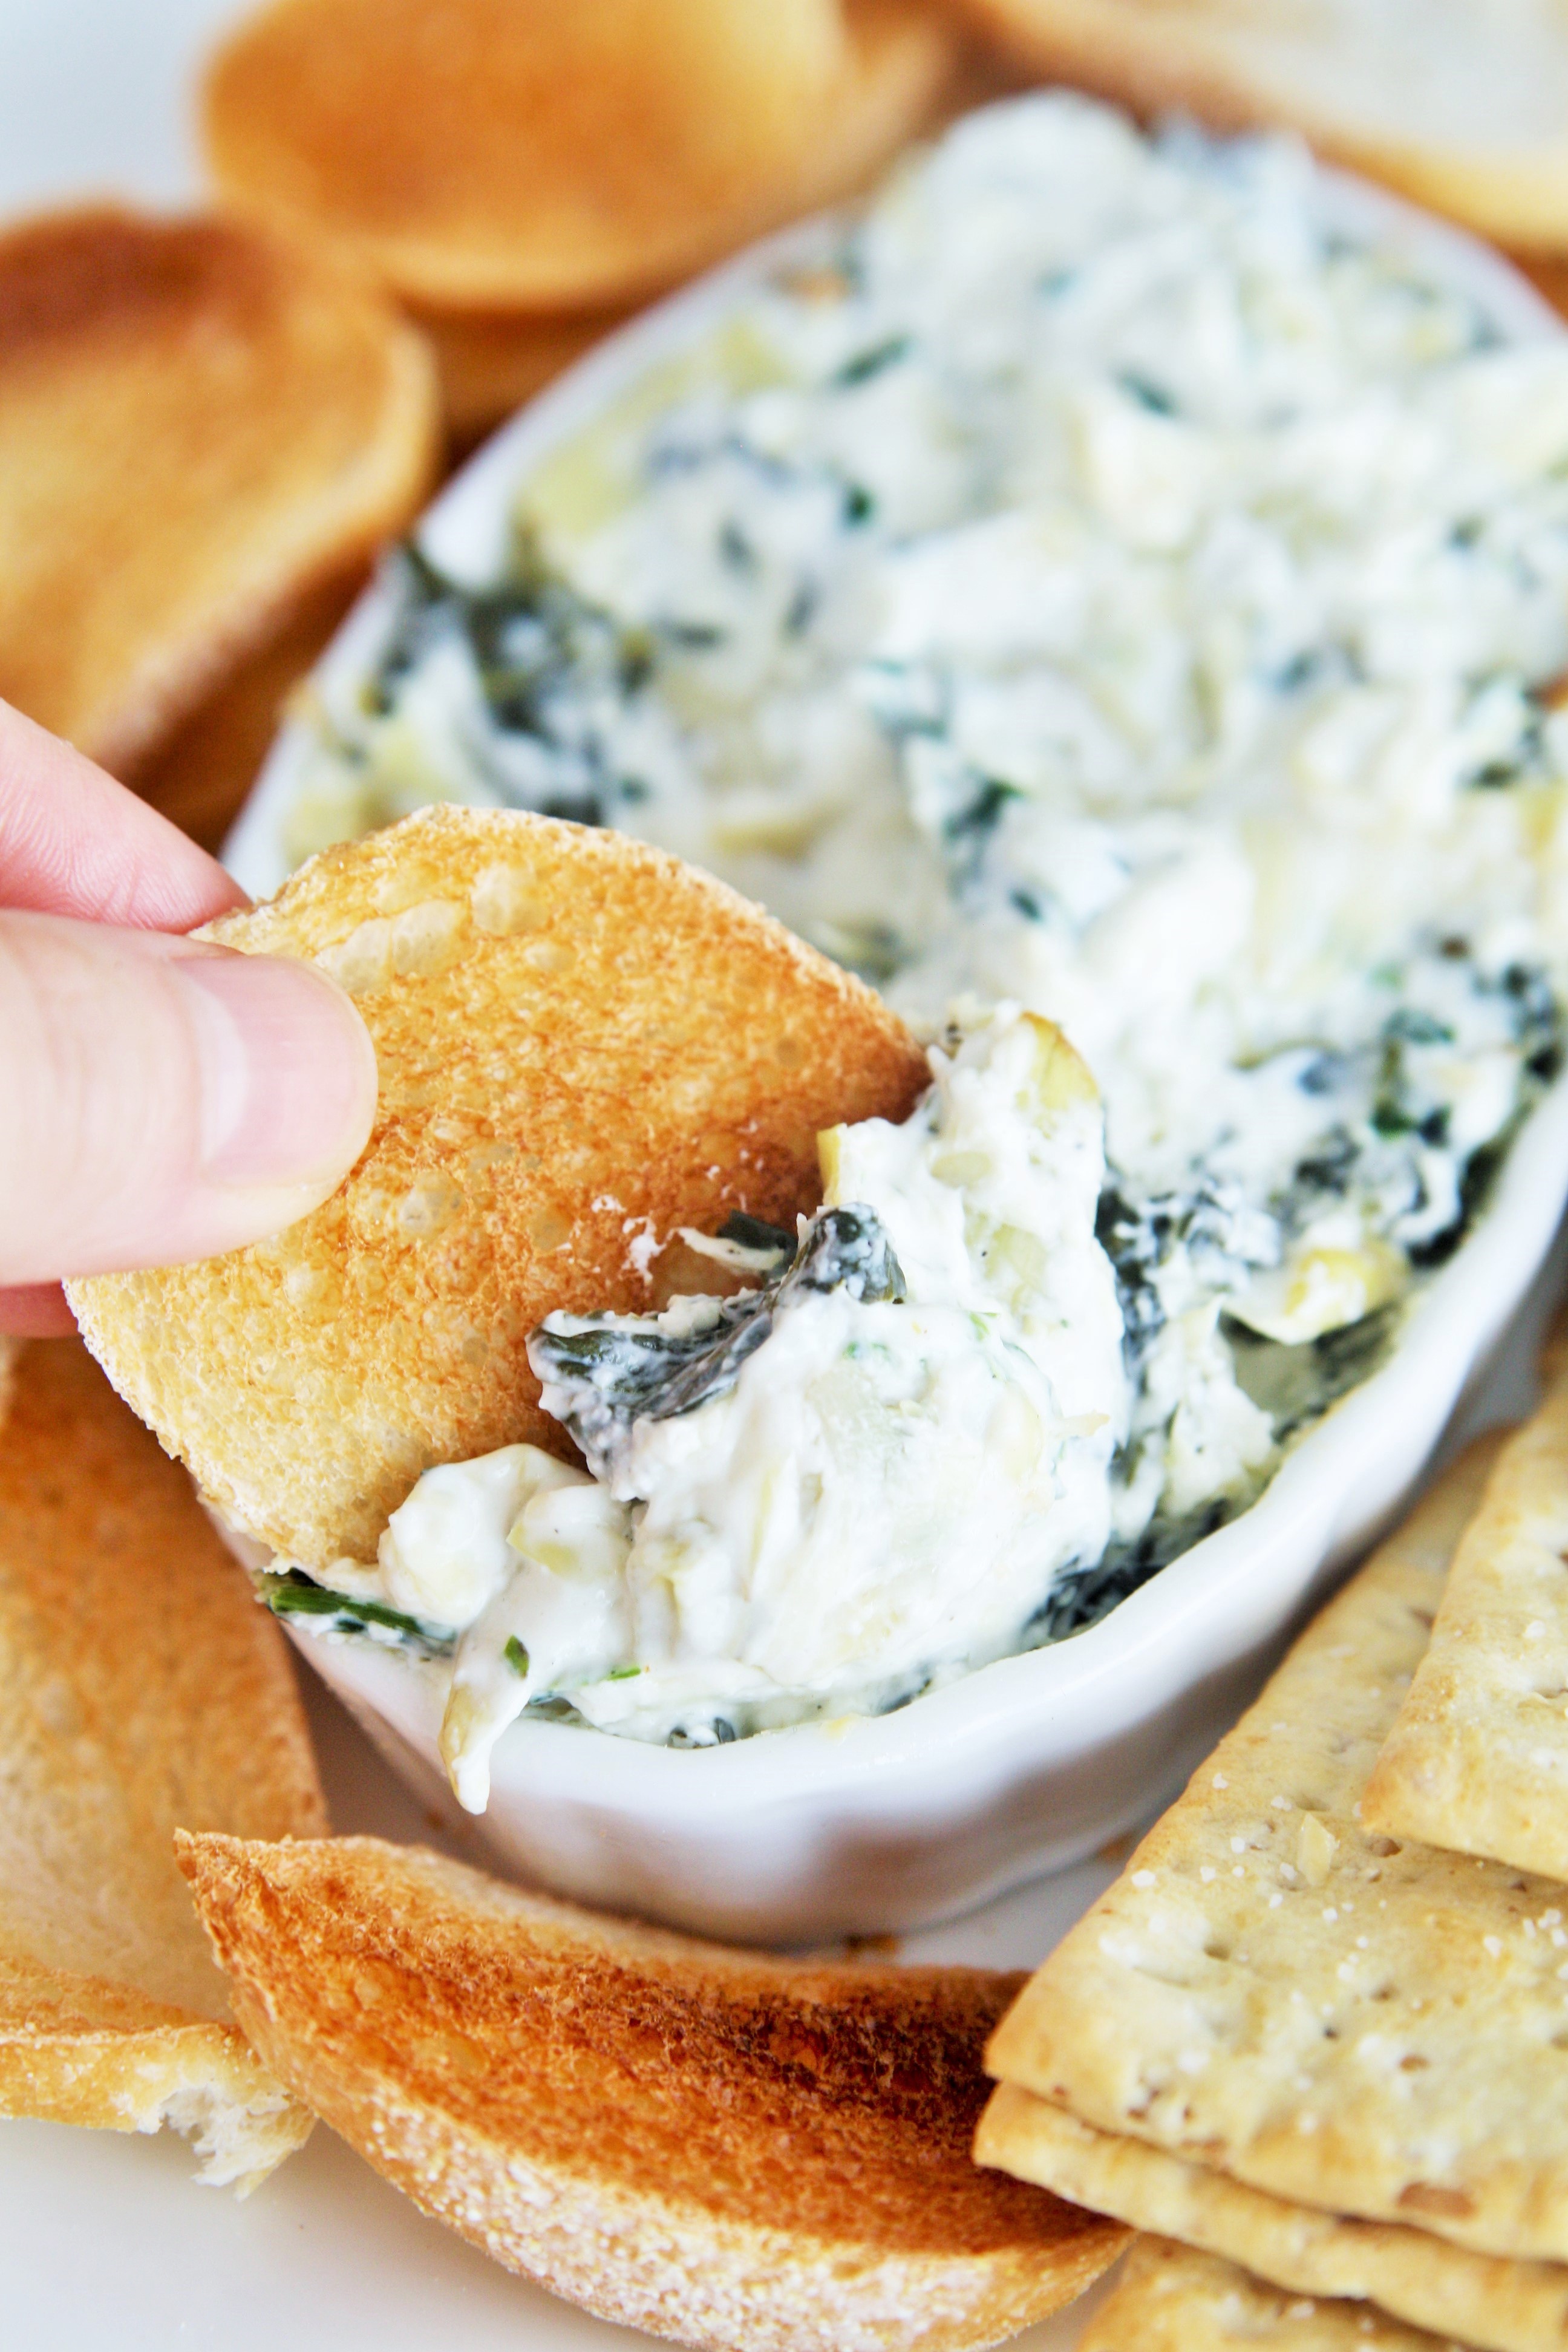 Spinach and artichoke dip is always a crowd pleaser, and this Cheesecake Factory copycat hot spinach and cheese dip is a delicious and easy appetizer you can make at home!